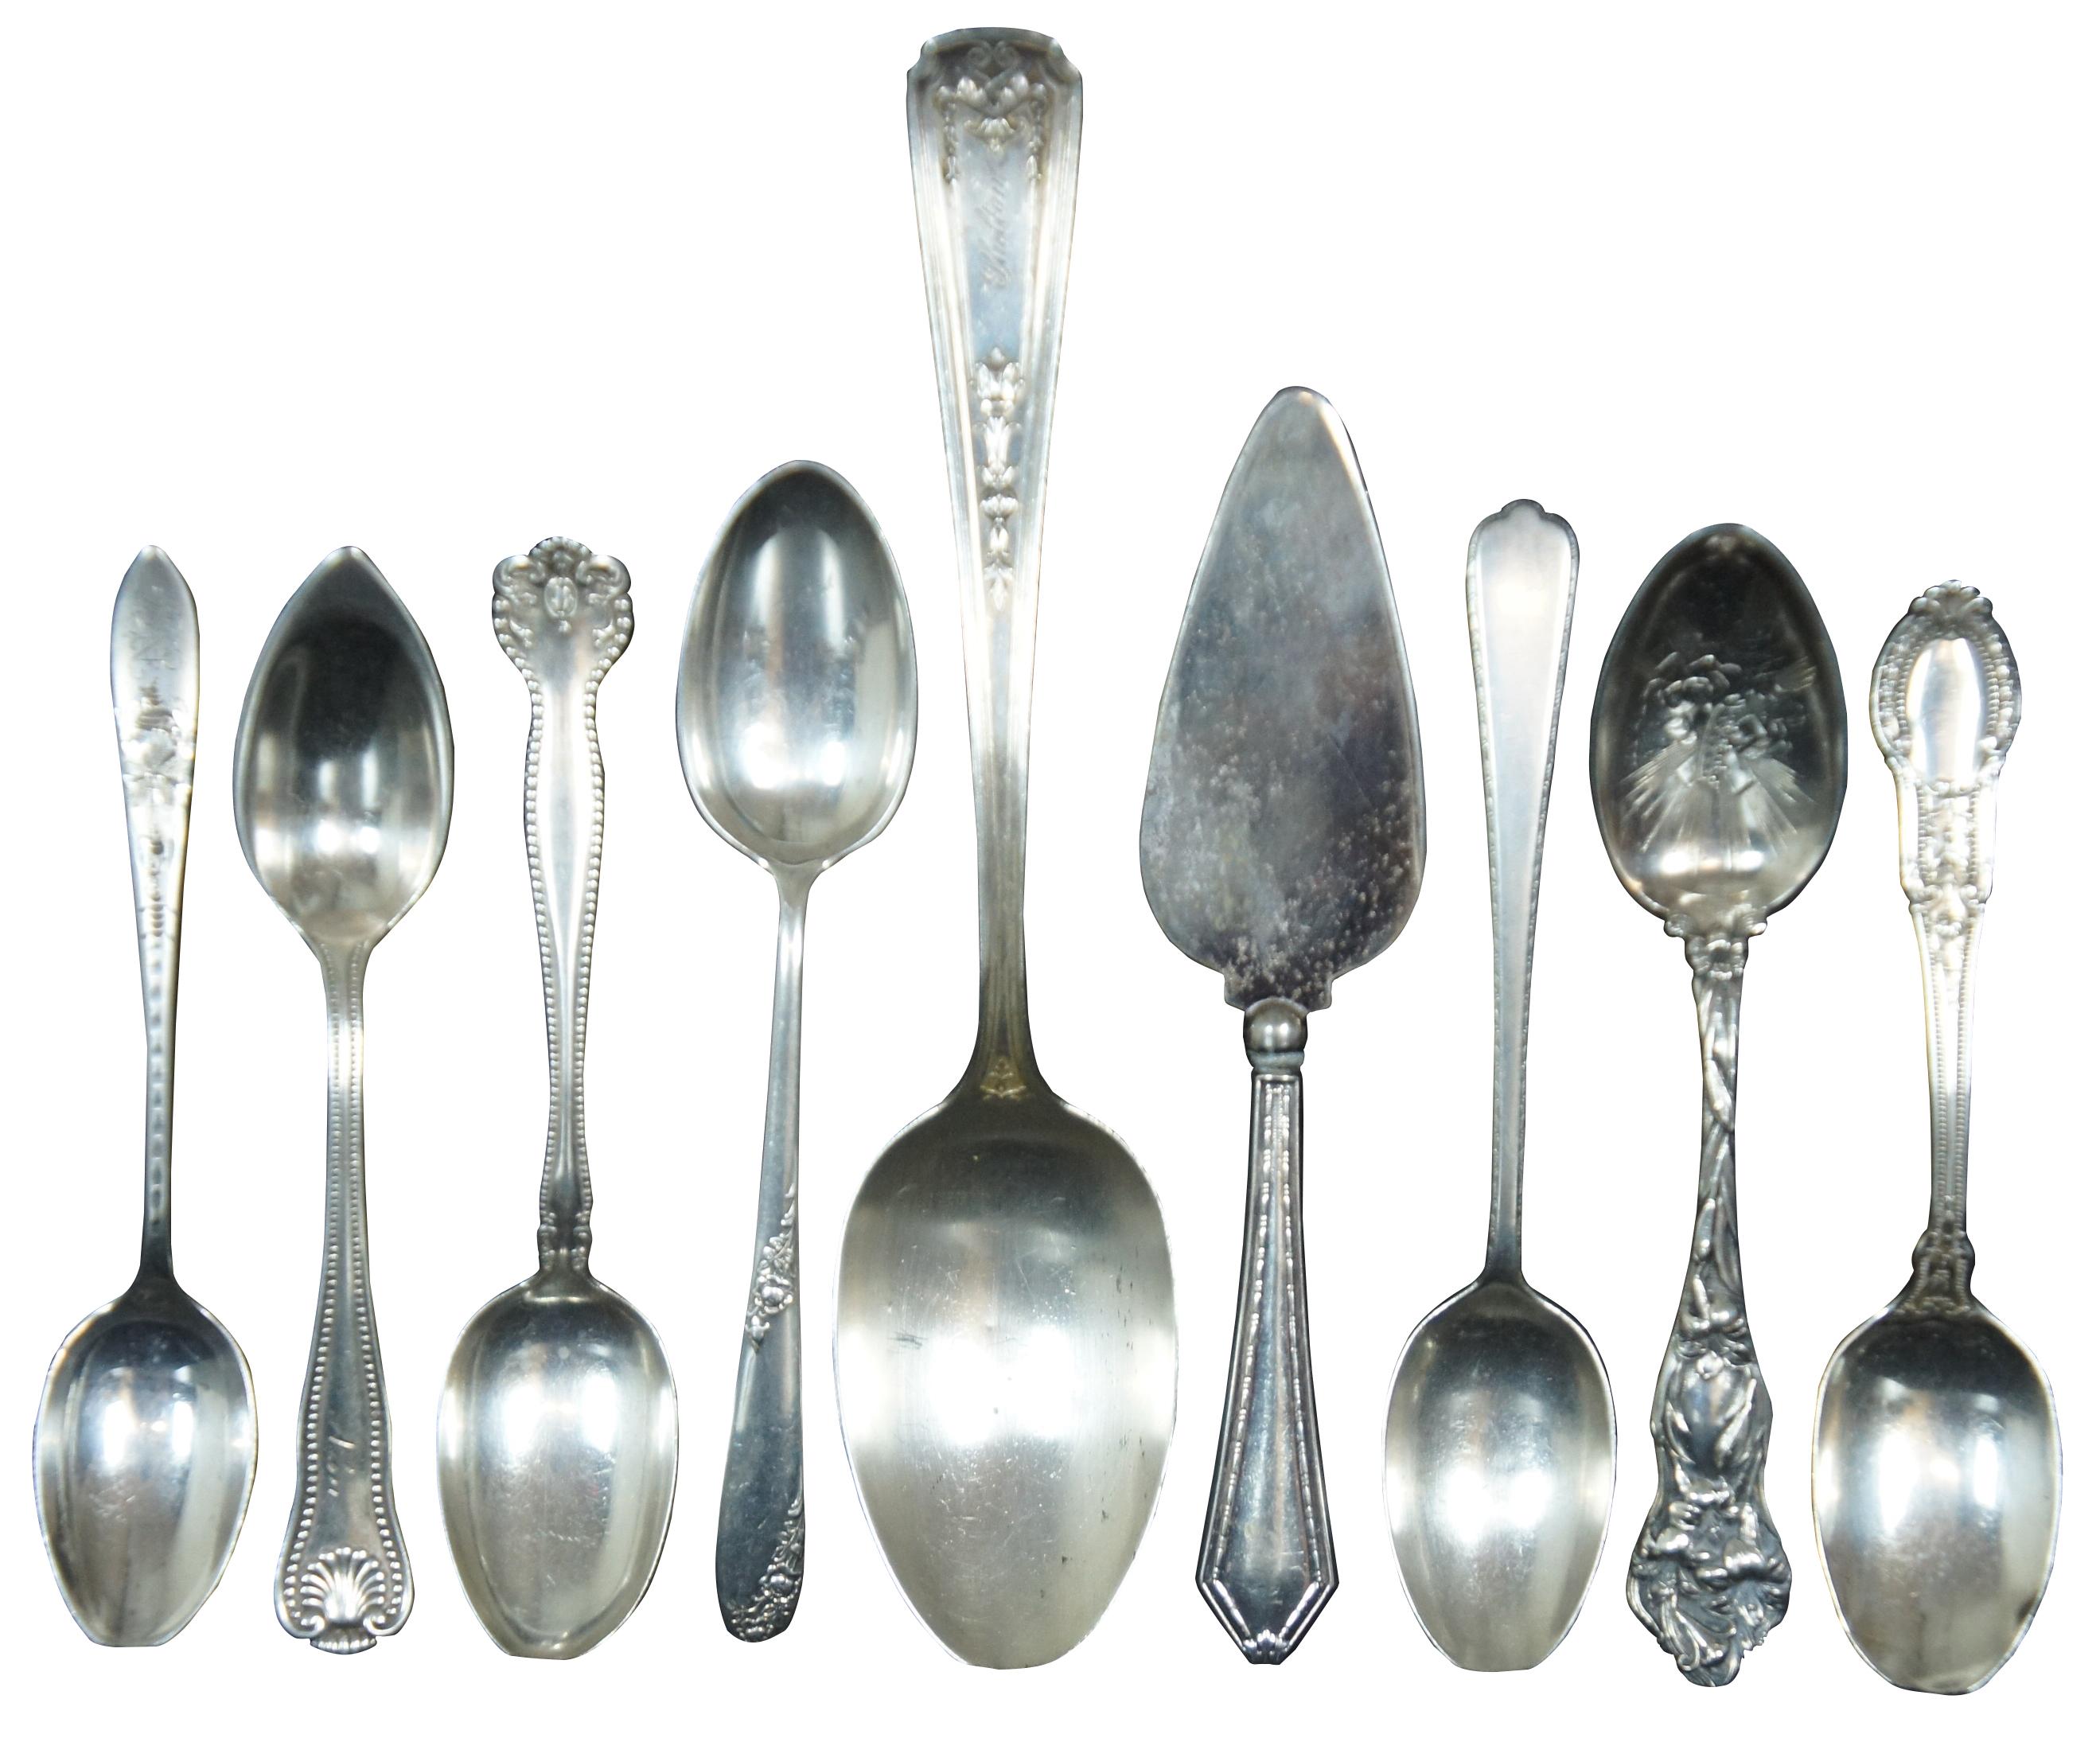 Lot of eighteen assorted antique / vintage sterling silver .925 tea, demitasse serving and souvenir spoons, plus one cheese spreader, manufactured by a variety of companies including Gorham, Robert Wallace & Sons, George W. Shiebler, Lunt, Saart